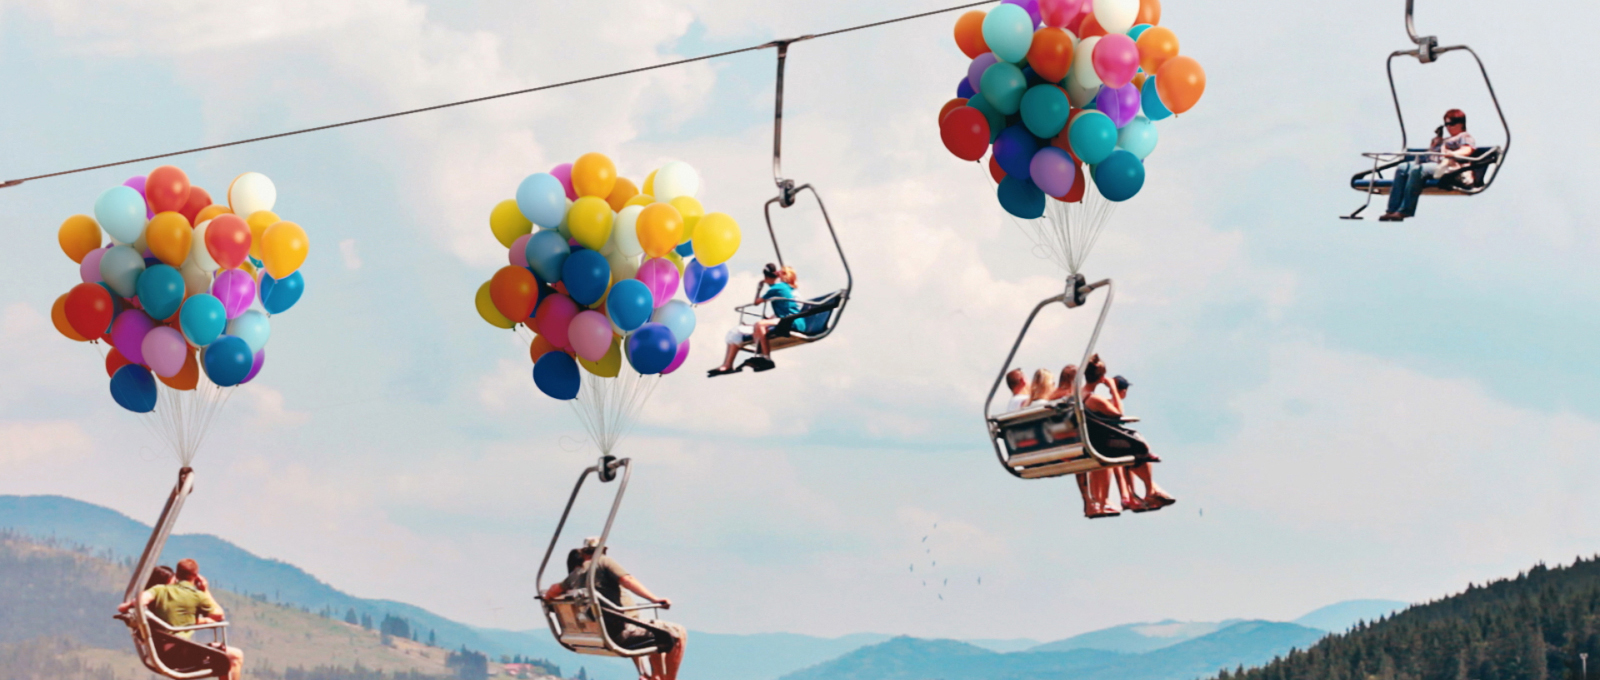 People on a ski lift that is carrying them up and powered by colorful balloons. 